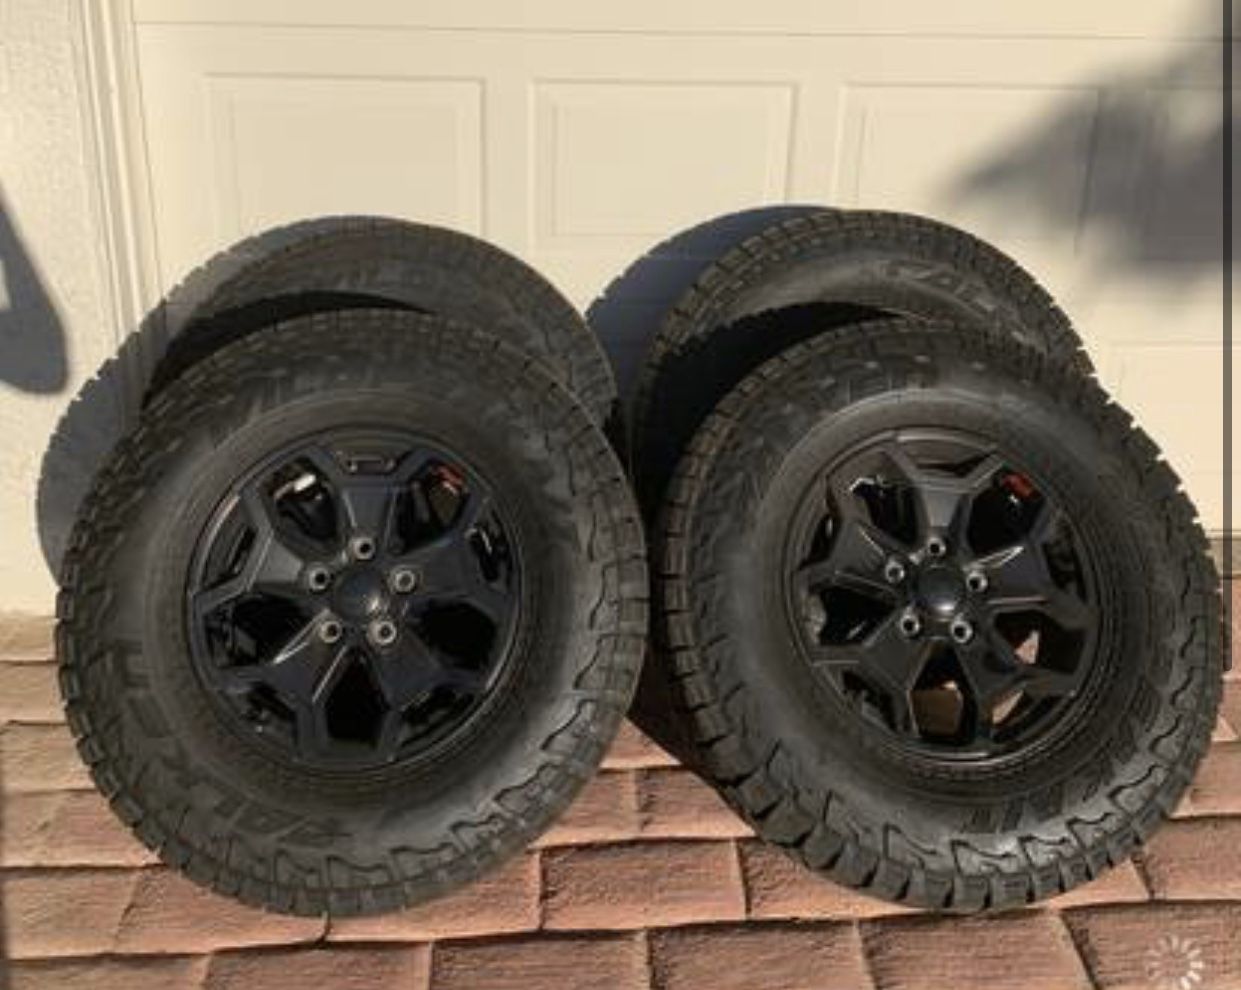 Falken tires off of a brand new 2020 Jeep Gladiator